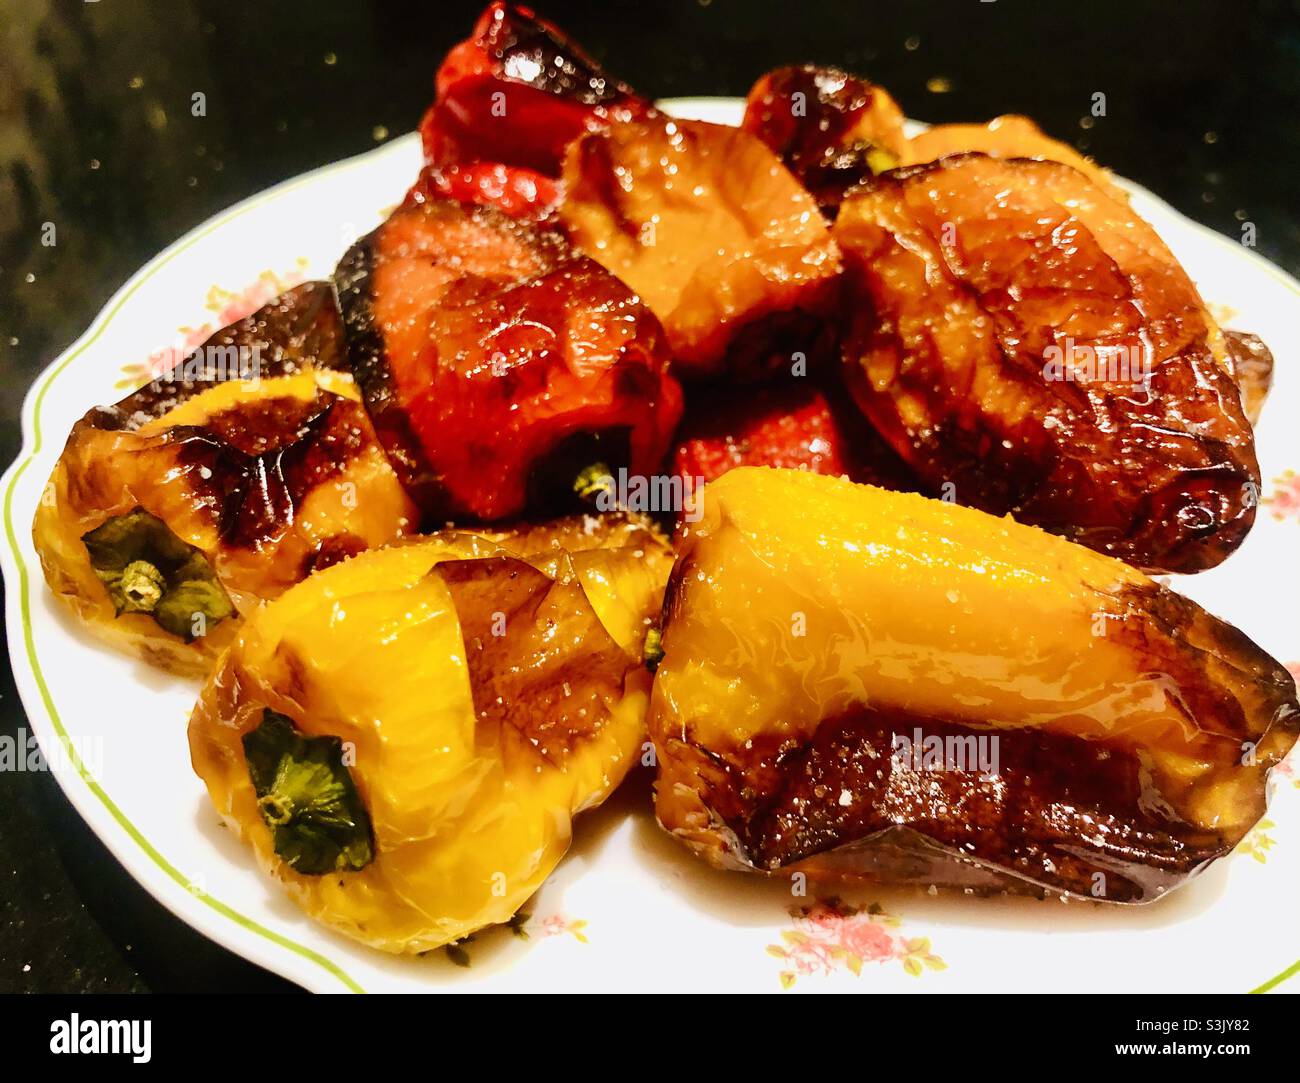 Red and yellow grilled peppers on white plate for dinner Stock Photo